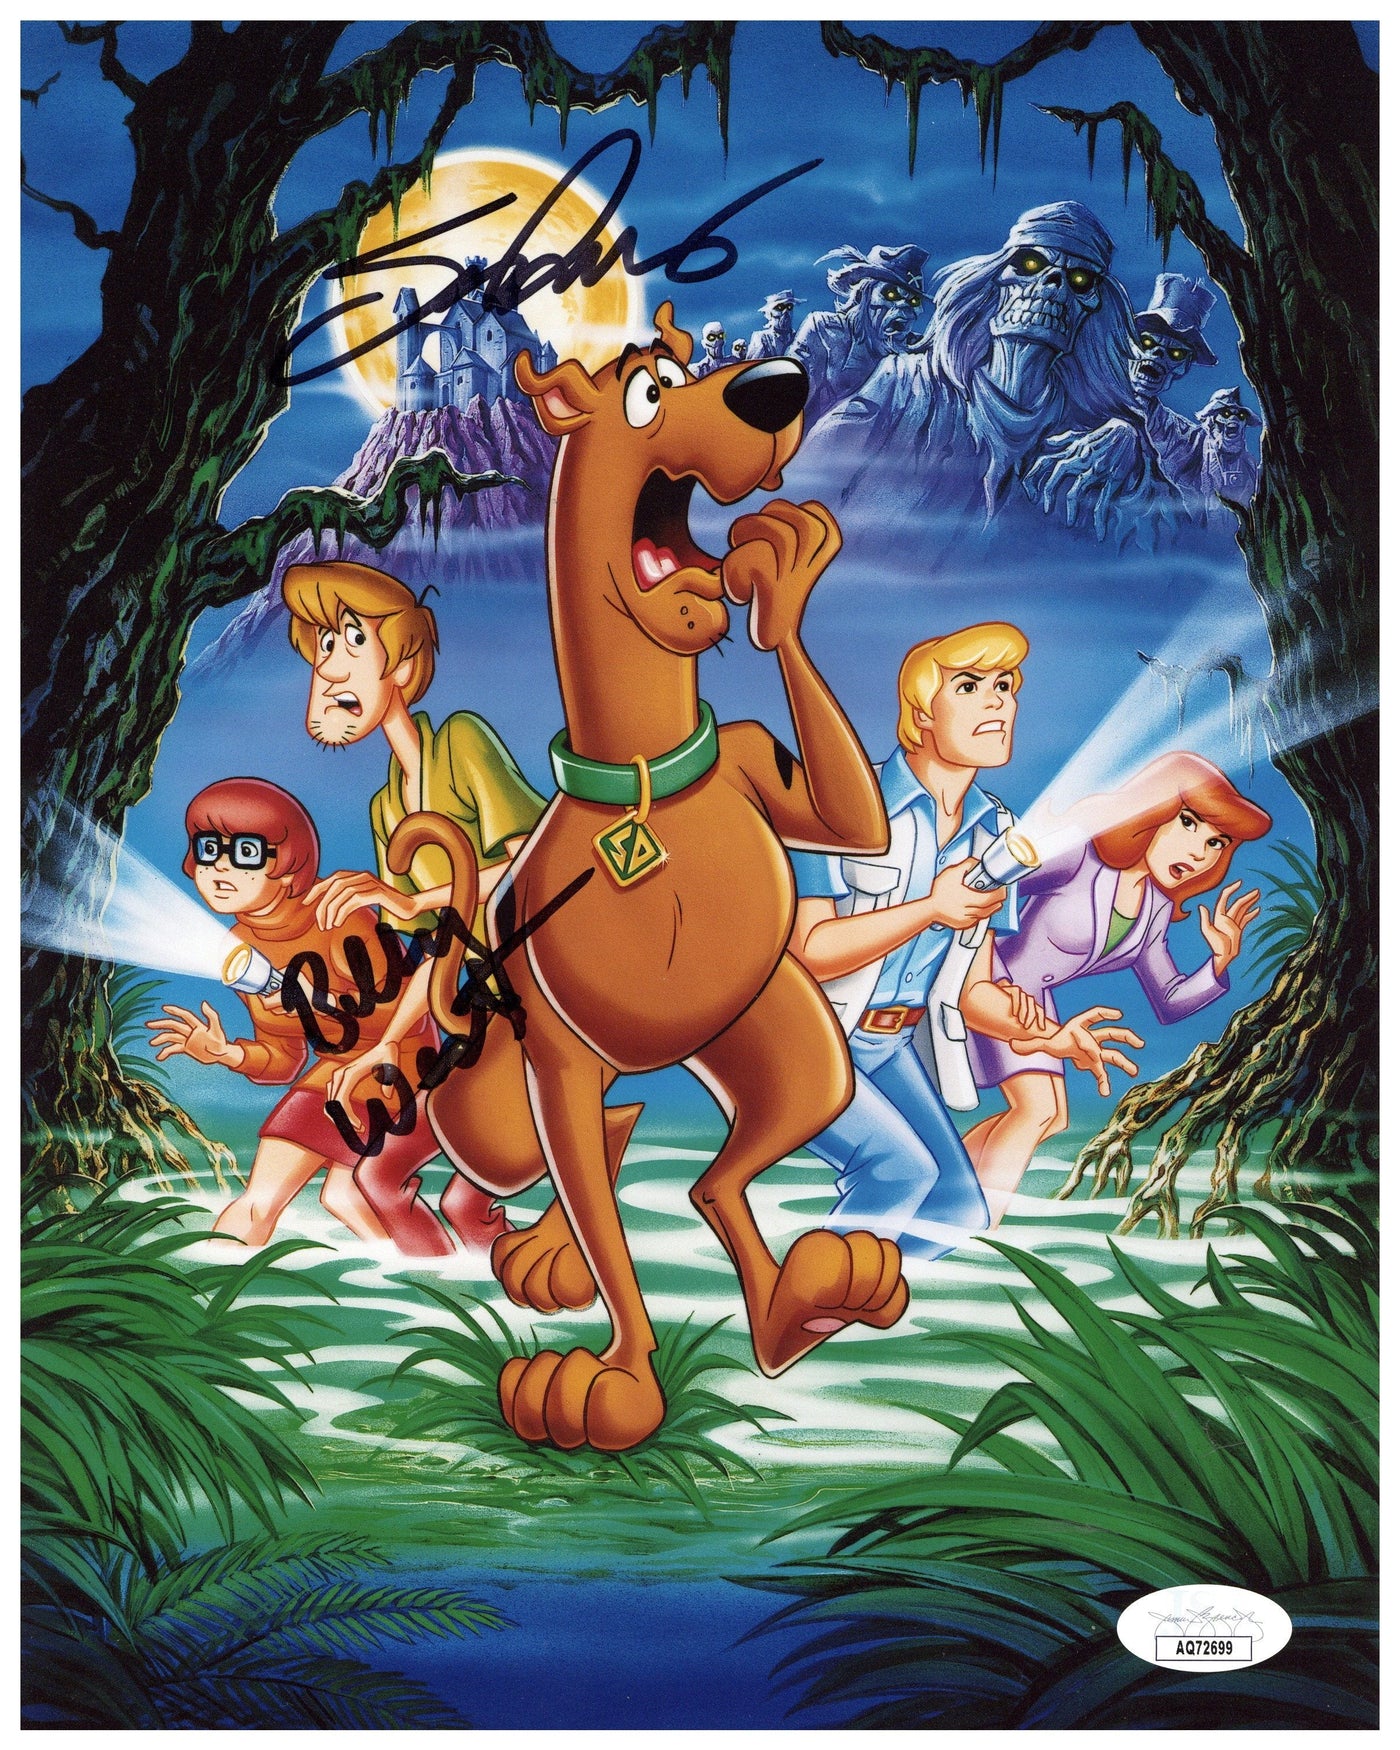 Scott Innes & Billy West Signed 8x10 Photo Scooby Doo Authentic Autographed JSA COA